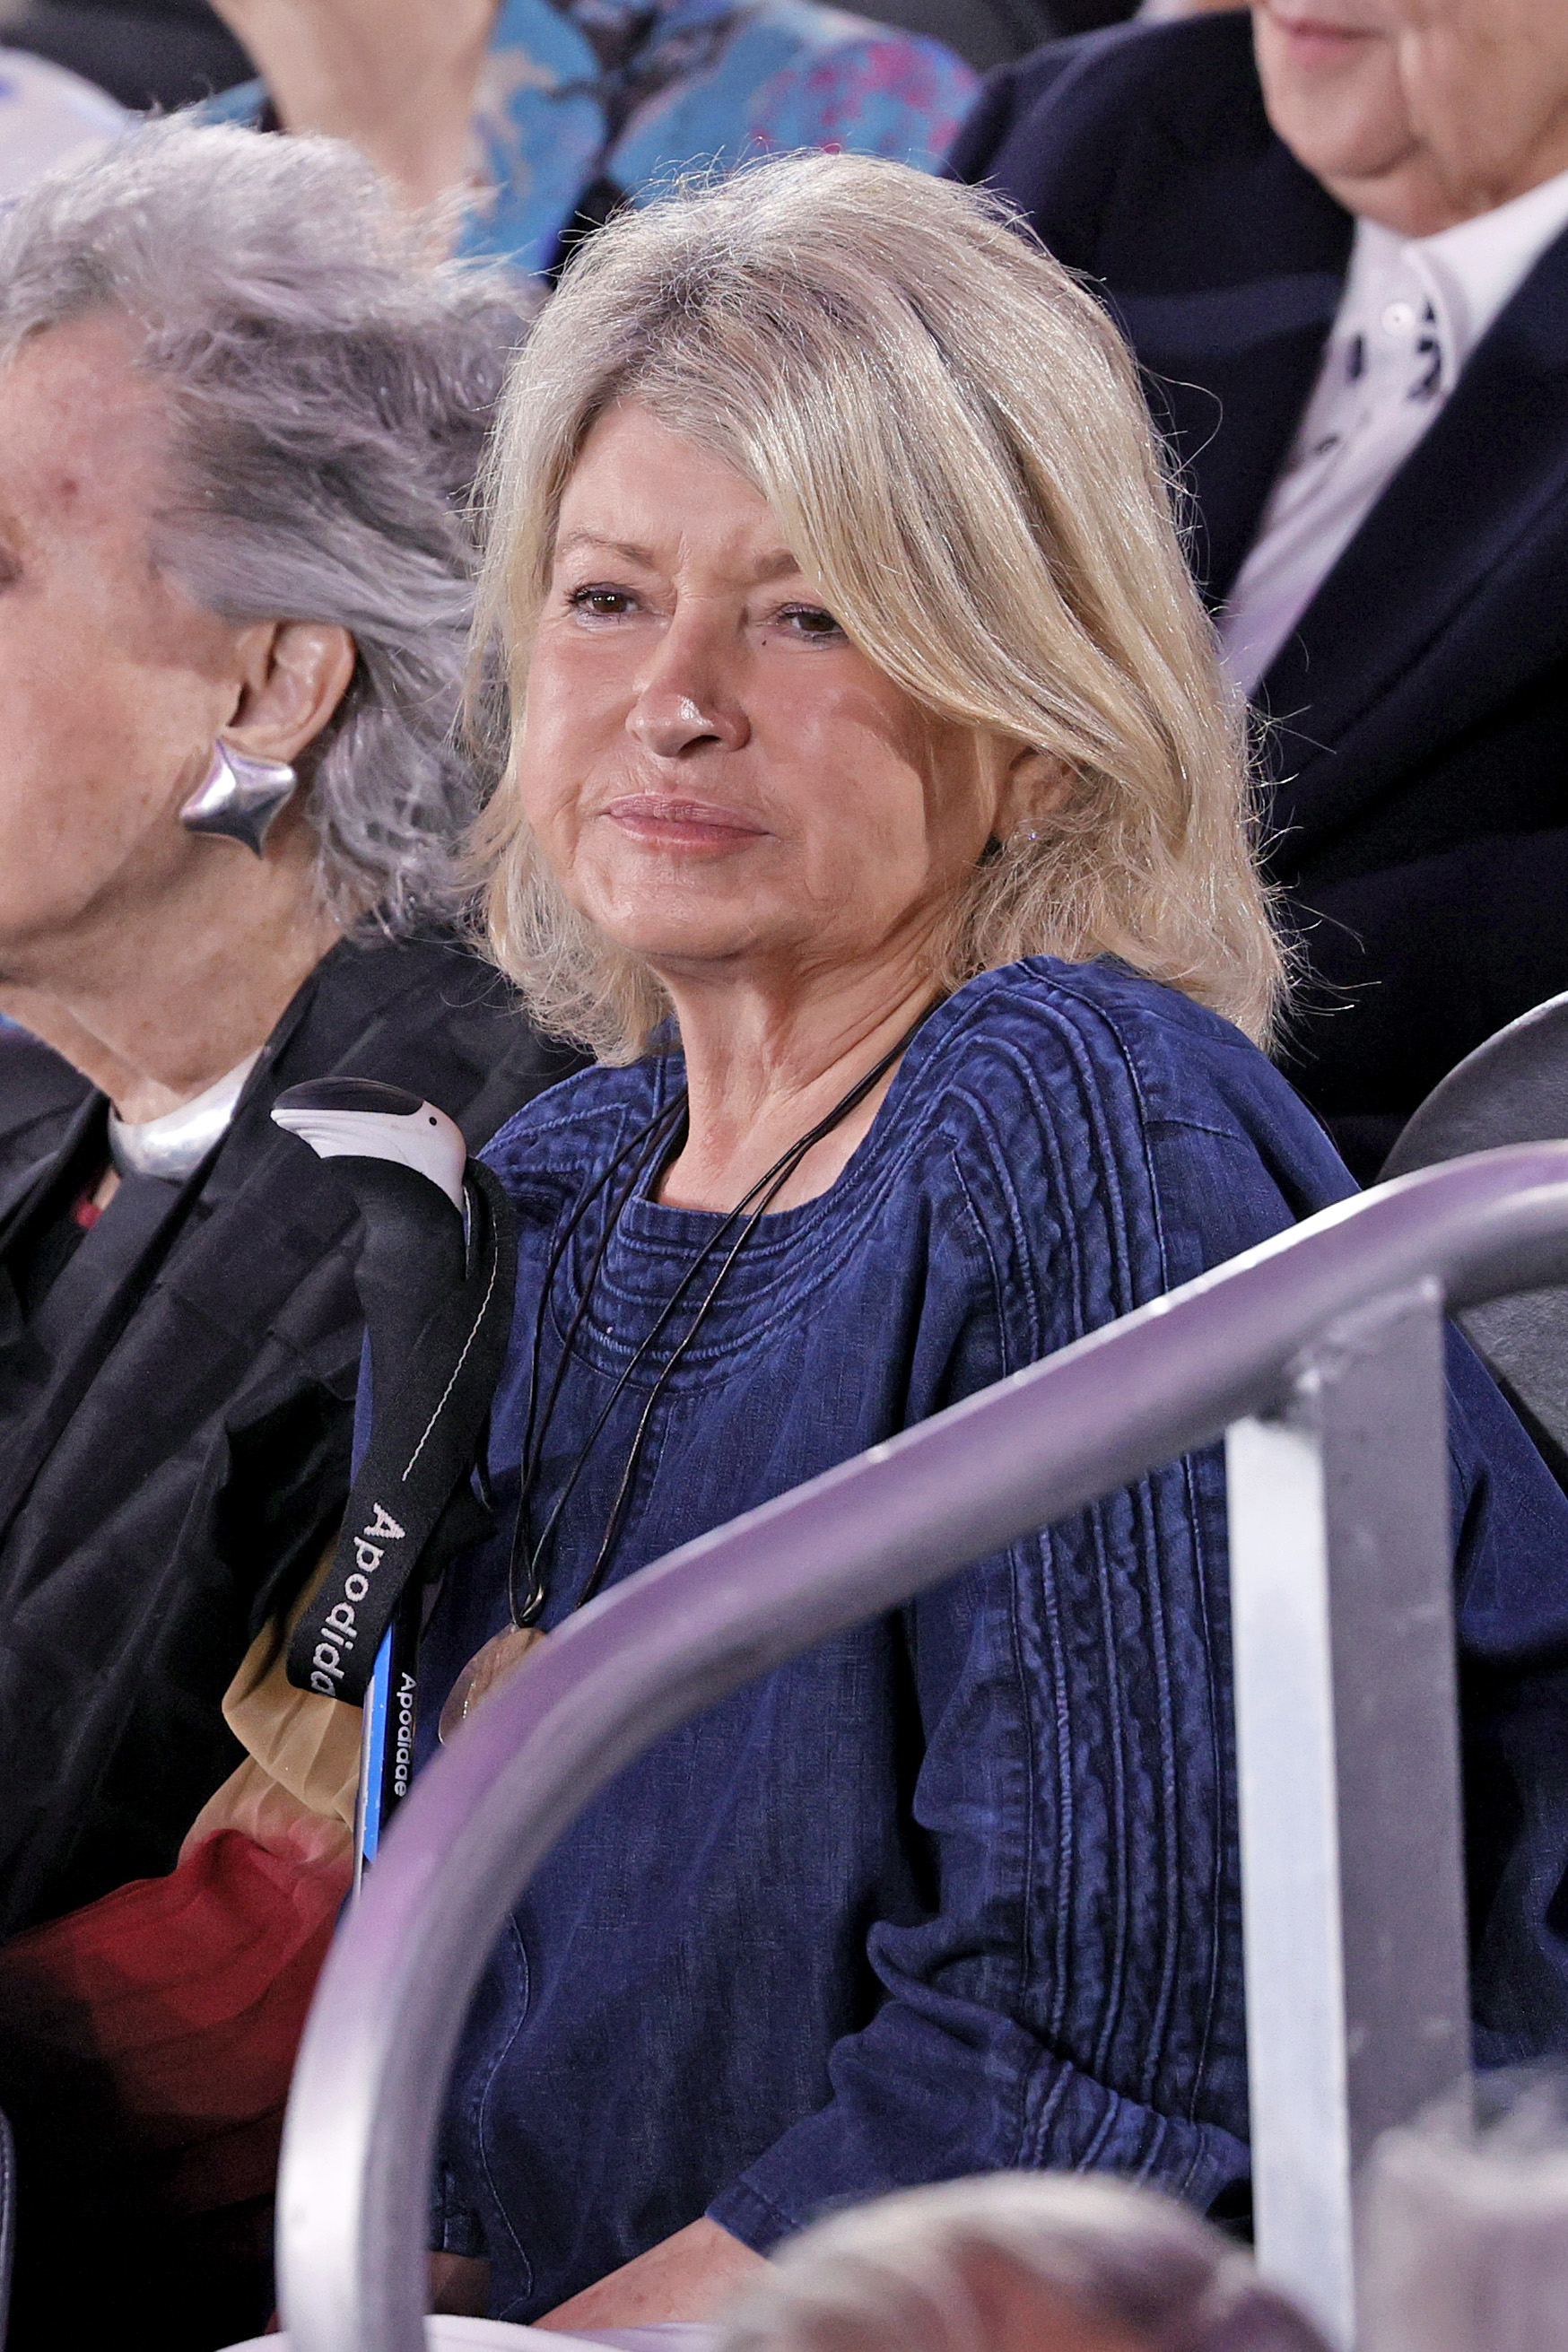 Martha Stewart at the 145th Annual Westminster Kennel Club Dog Show in New York in 2021 | Source: Getty Images